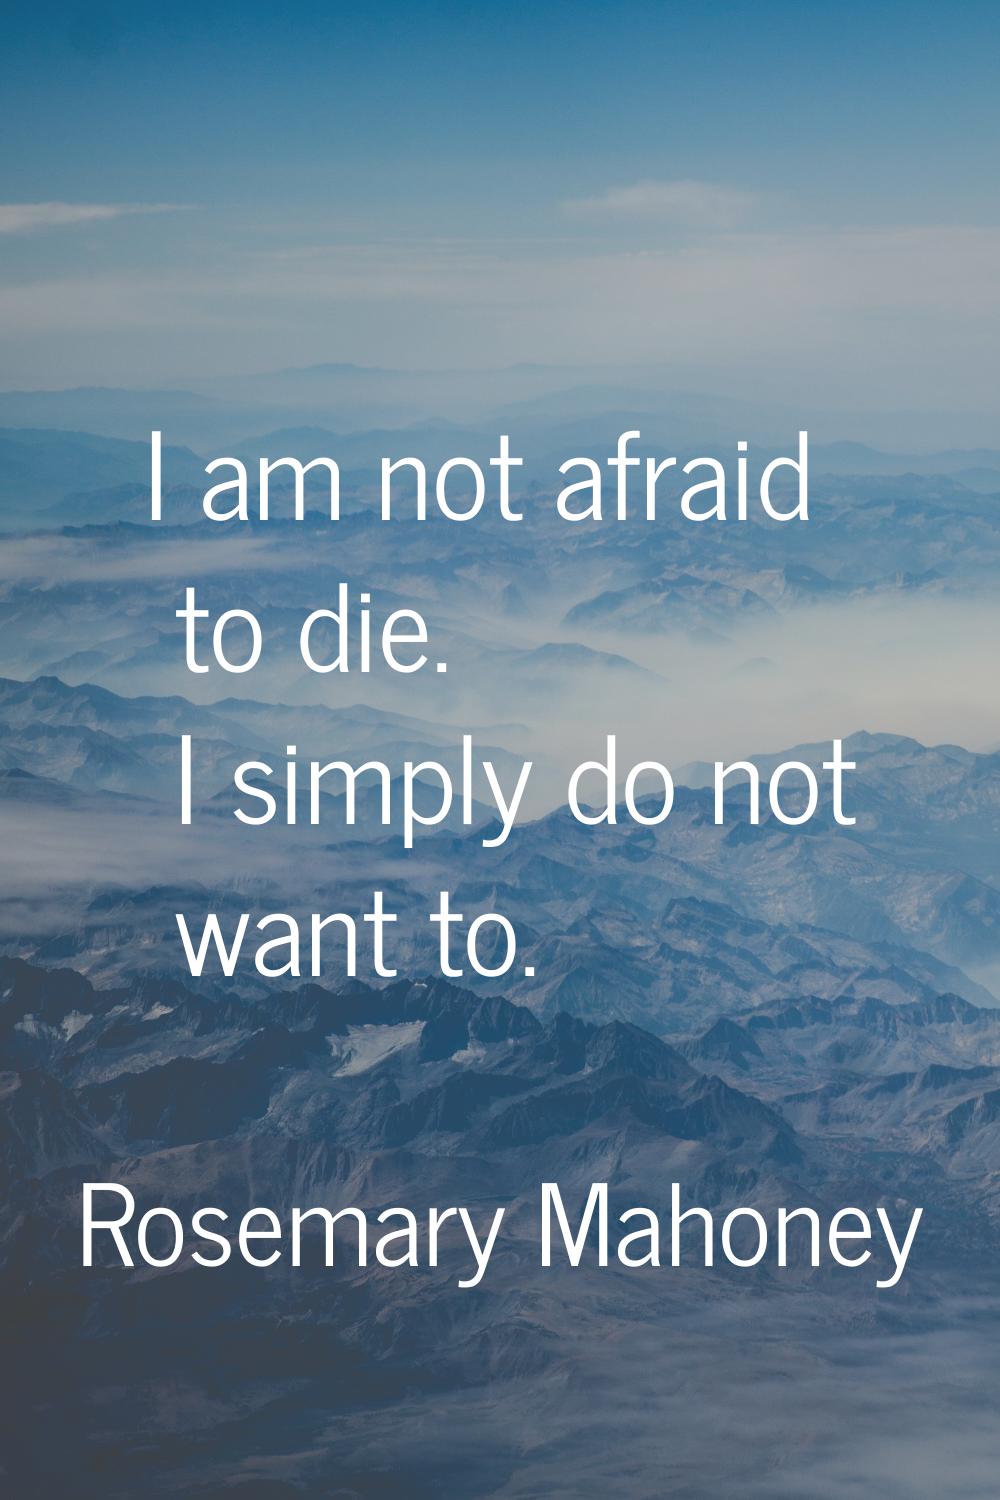 I am not afraid to die. I simply do not want to.